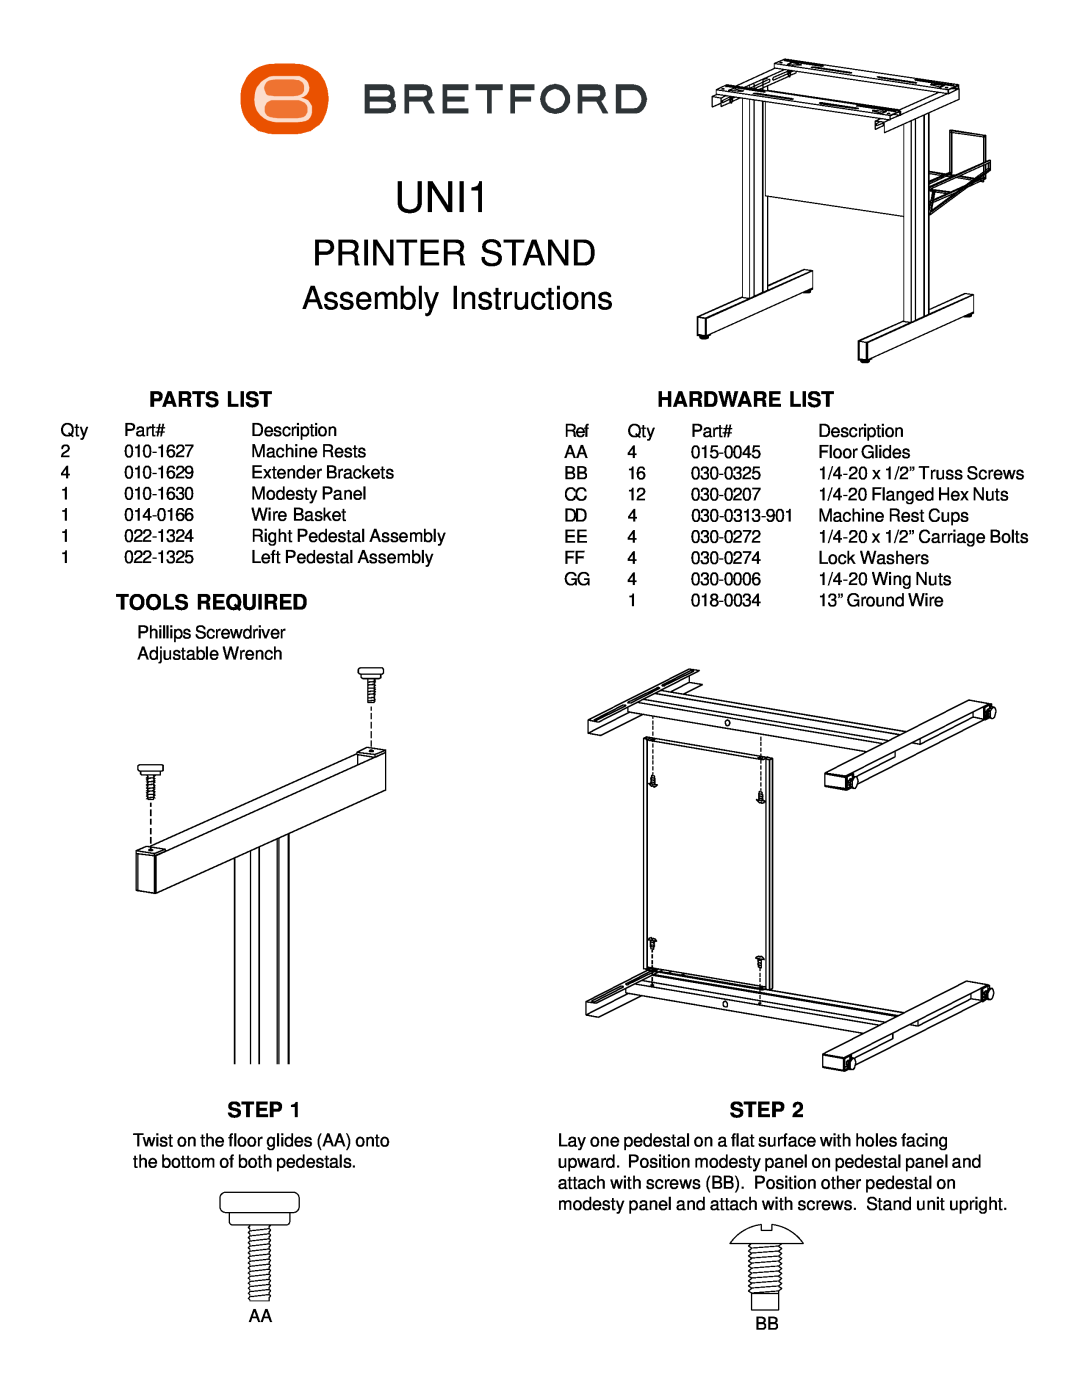 Bretford UNI1 manual Parts List, Hardware List, Tools Required, Step, Printer Stand, Assembly Instructions 